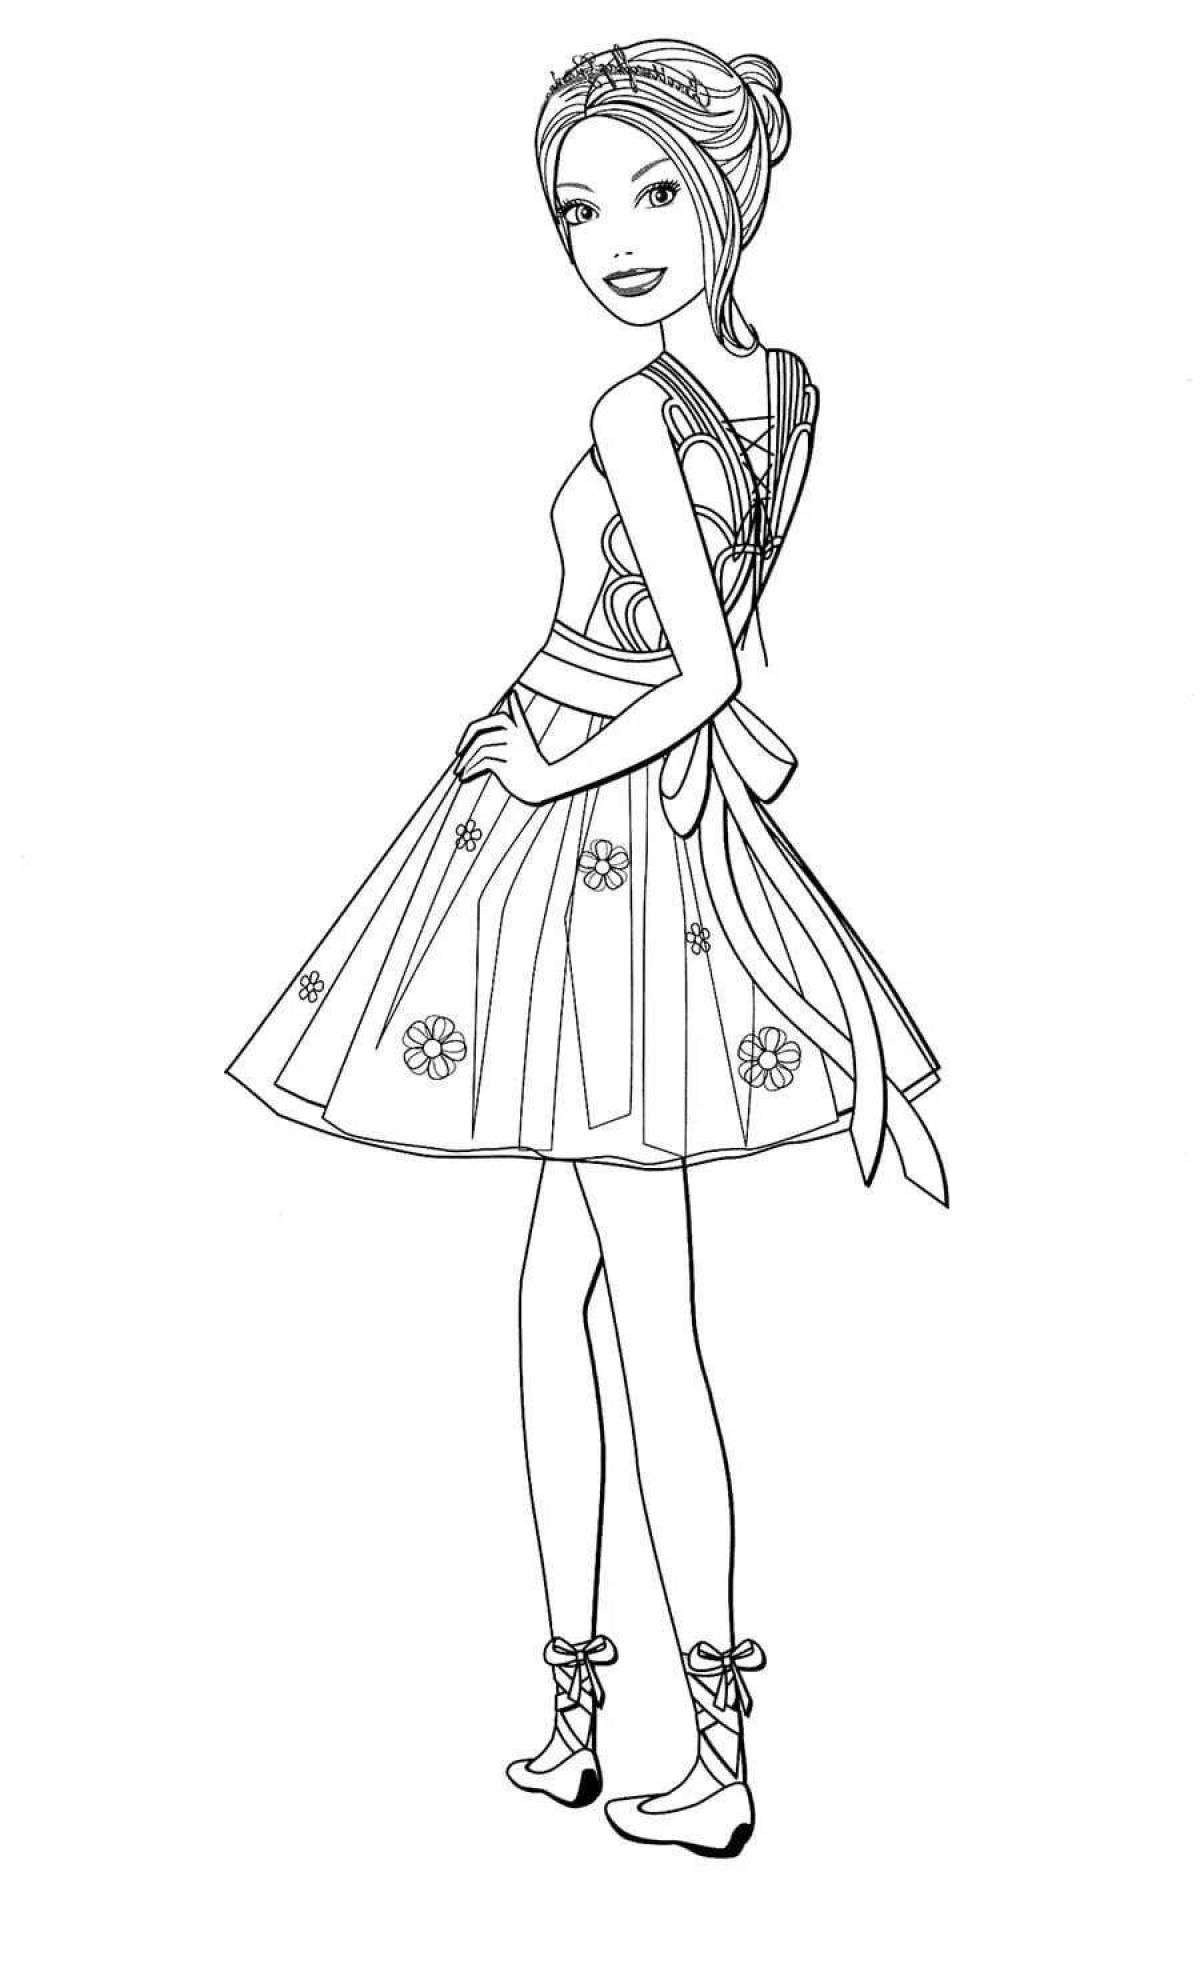 Full body coloring page of beautiful girl